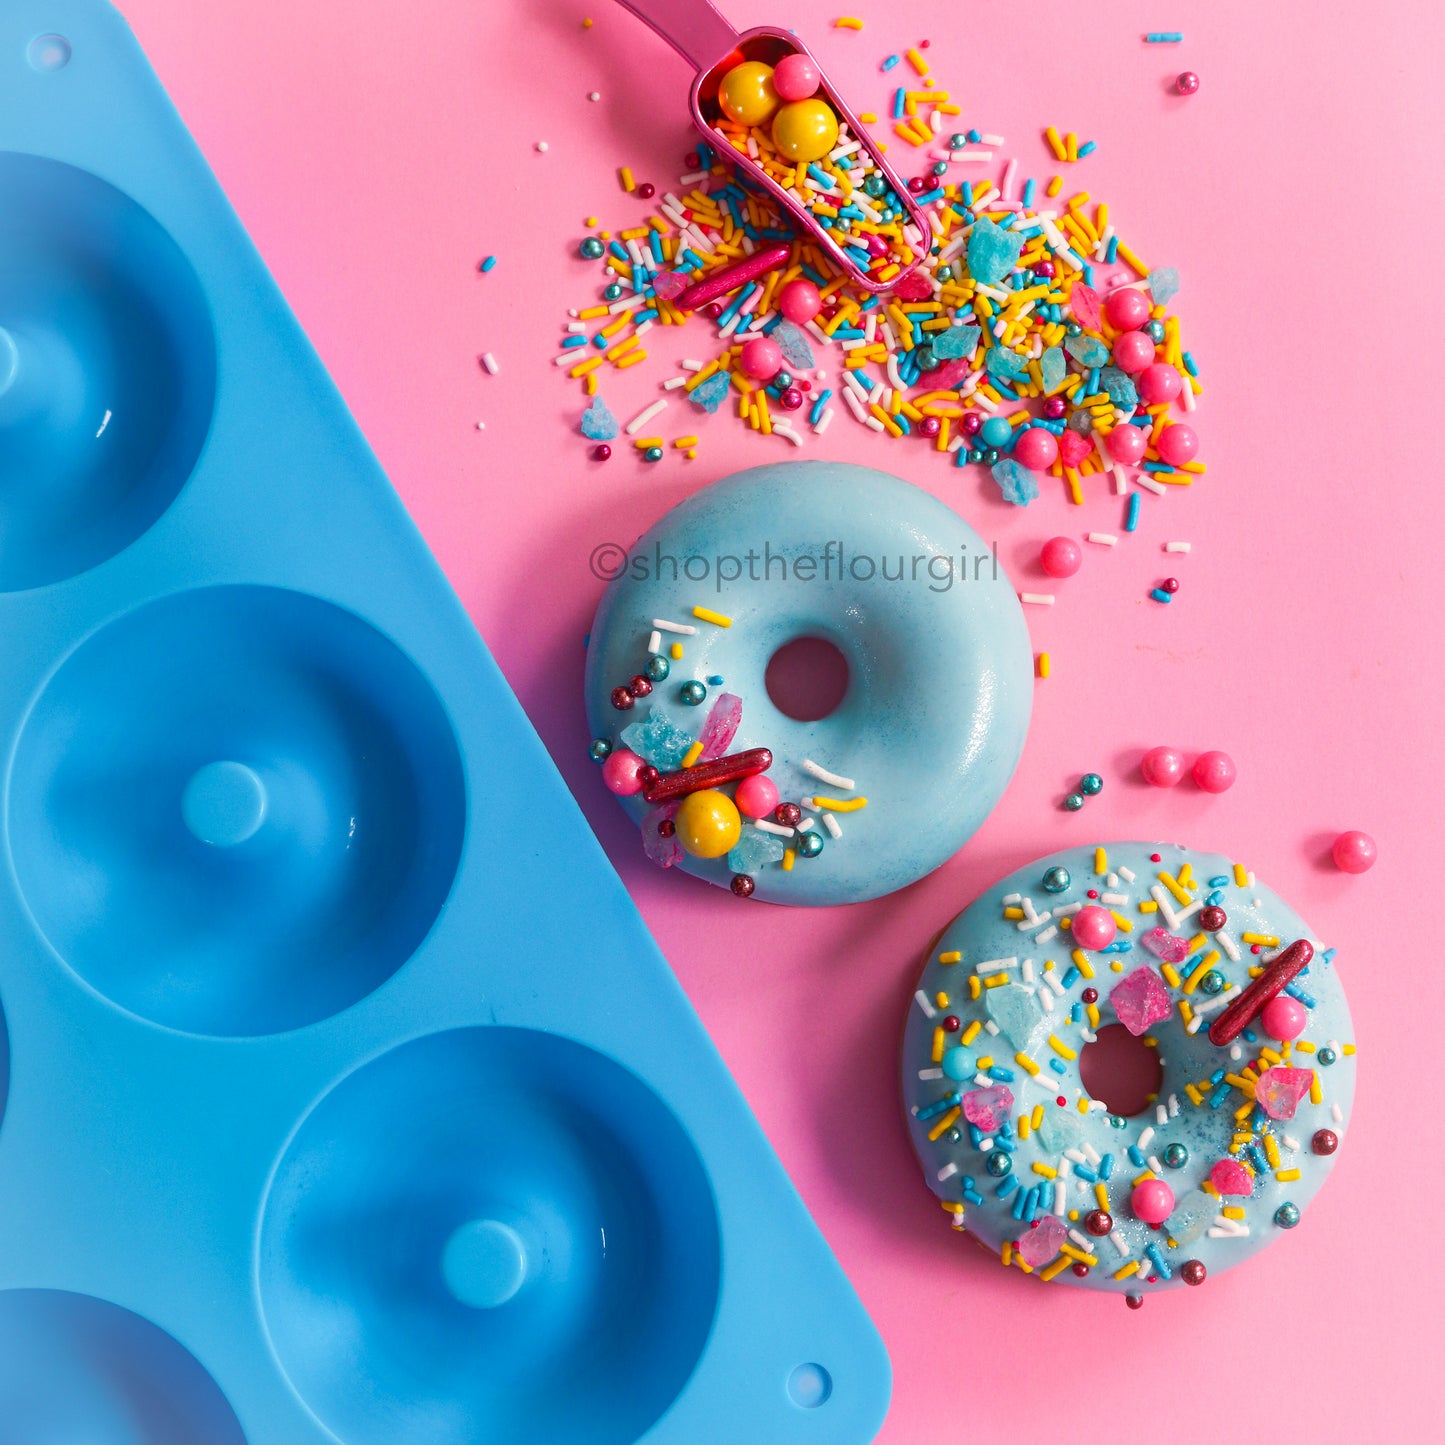 3D 6-Cavity Silicone Donut Mold